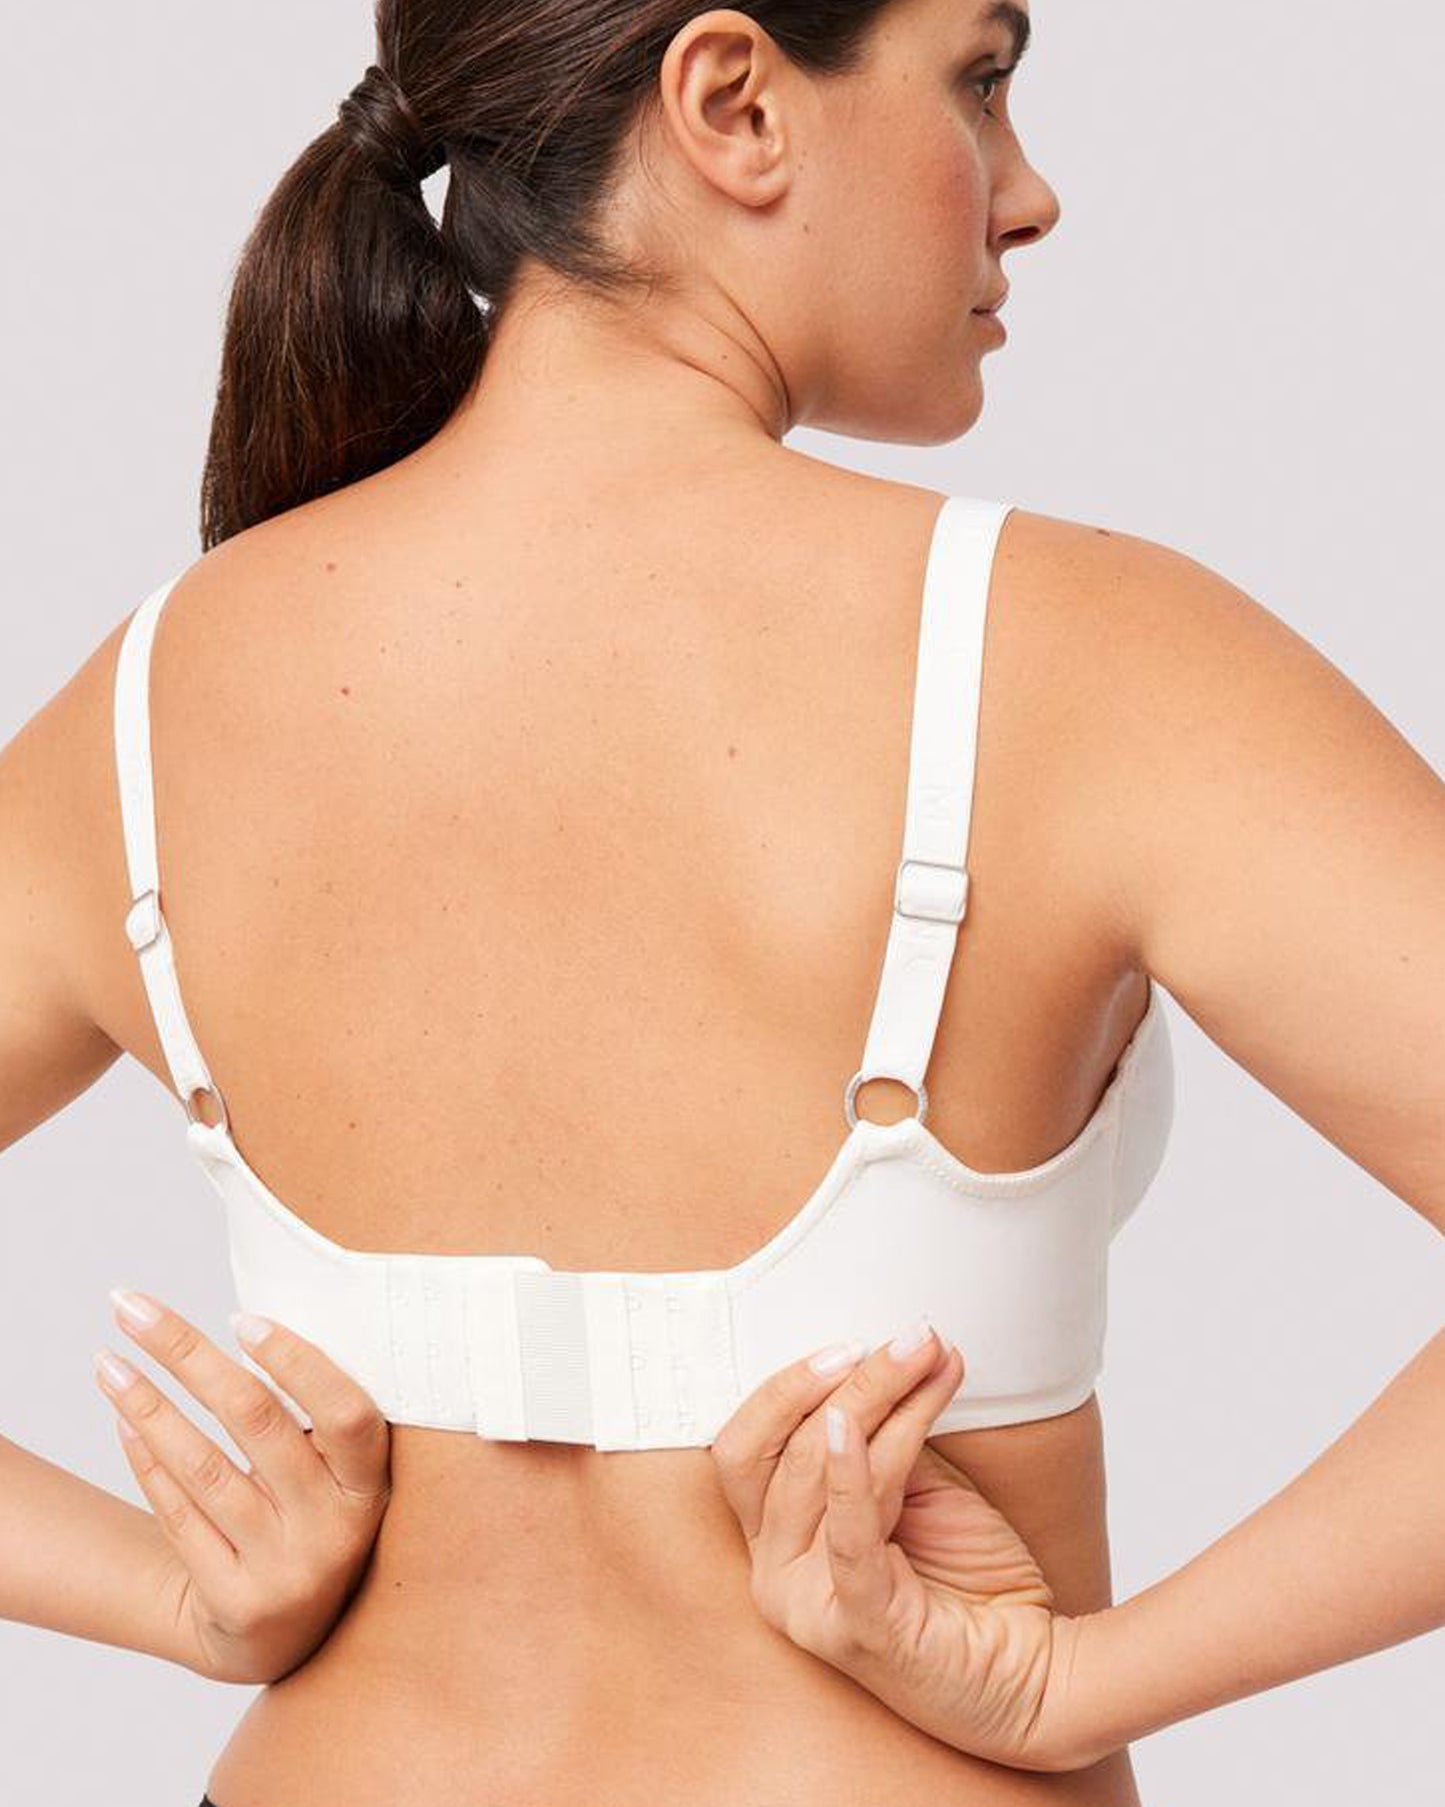 Ysabel Mora 10143 Bra Extender - 3 bra closure extenders with elastic in white. They fit the basic 3 rows of hook-and-eye closures, providing 3 more closing positions so that your bra fits the way you like it.